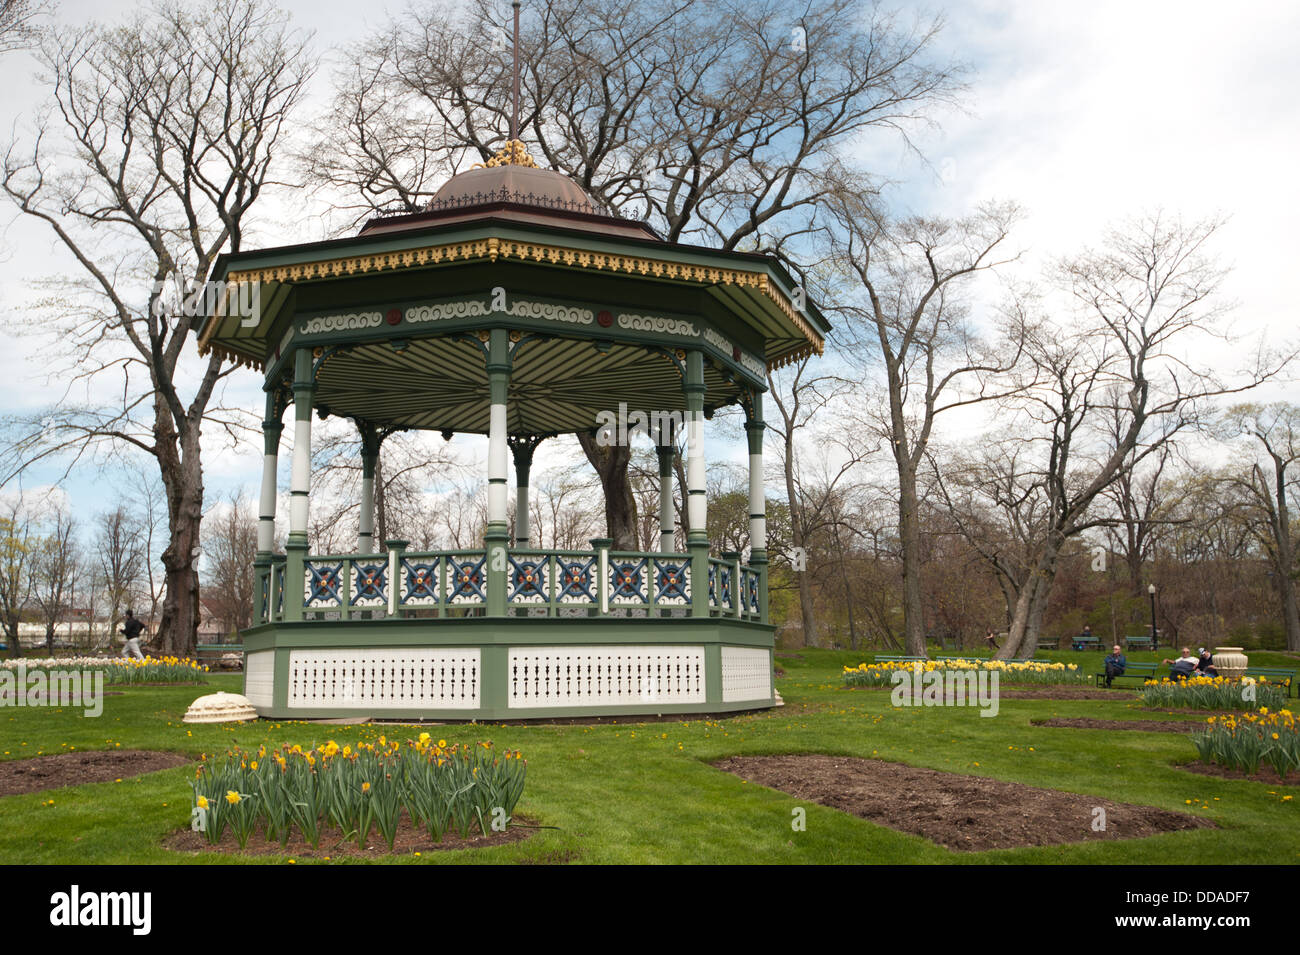 gazebo in public gardens Nova Scotia surrounded by trees and flower bed. Stock Photo